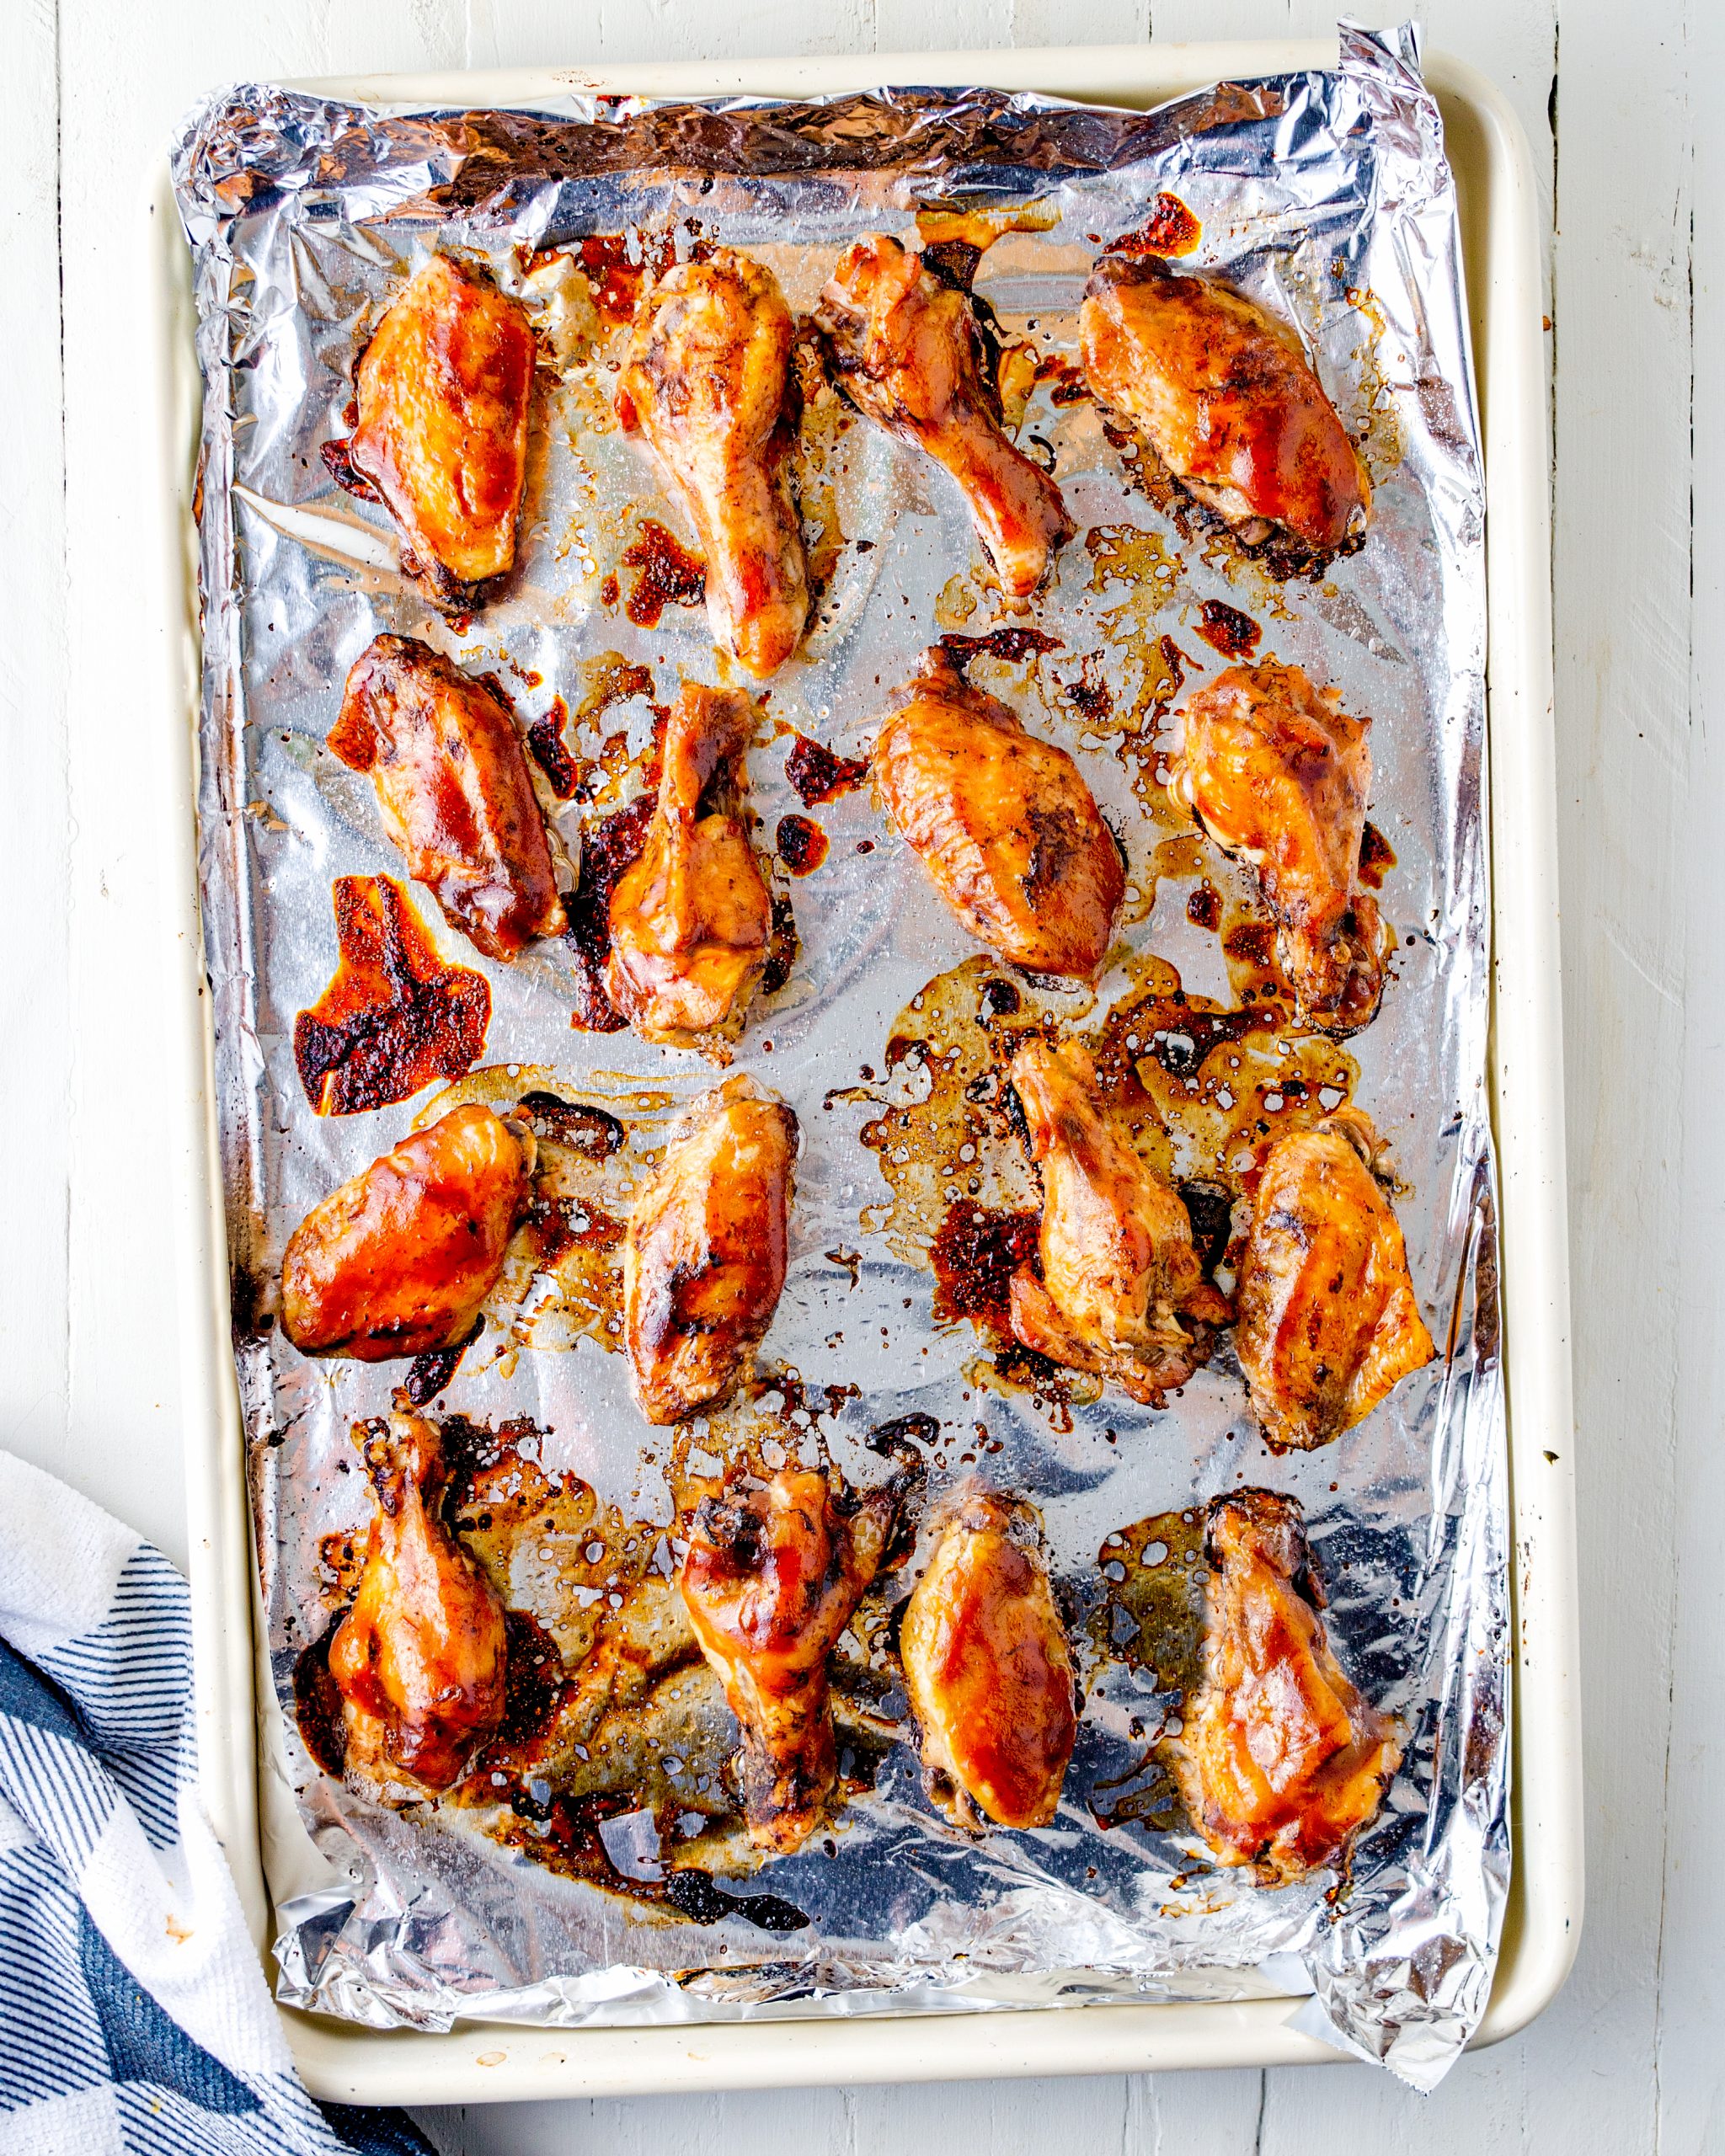 Bake the wings or drummies in a 350-degree oven for 10-15 minutes until the bbq sauce has caramelized.